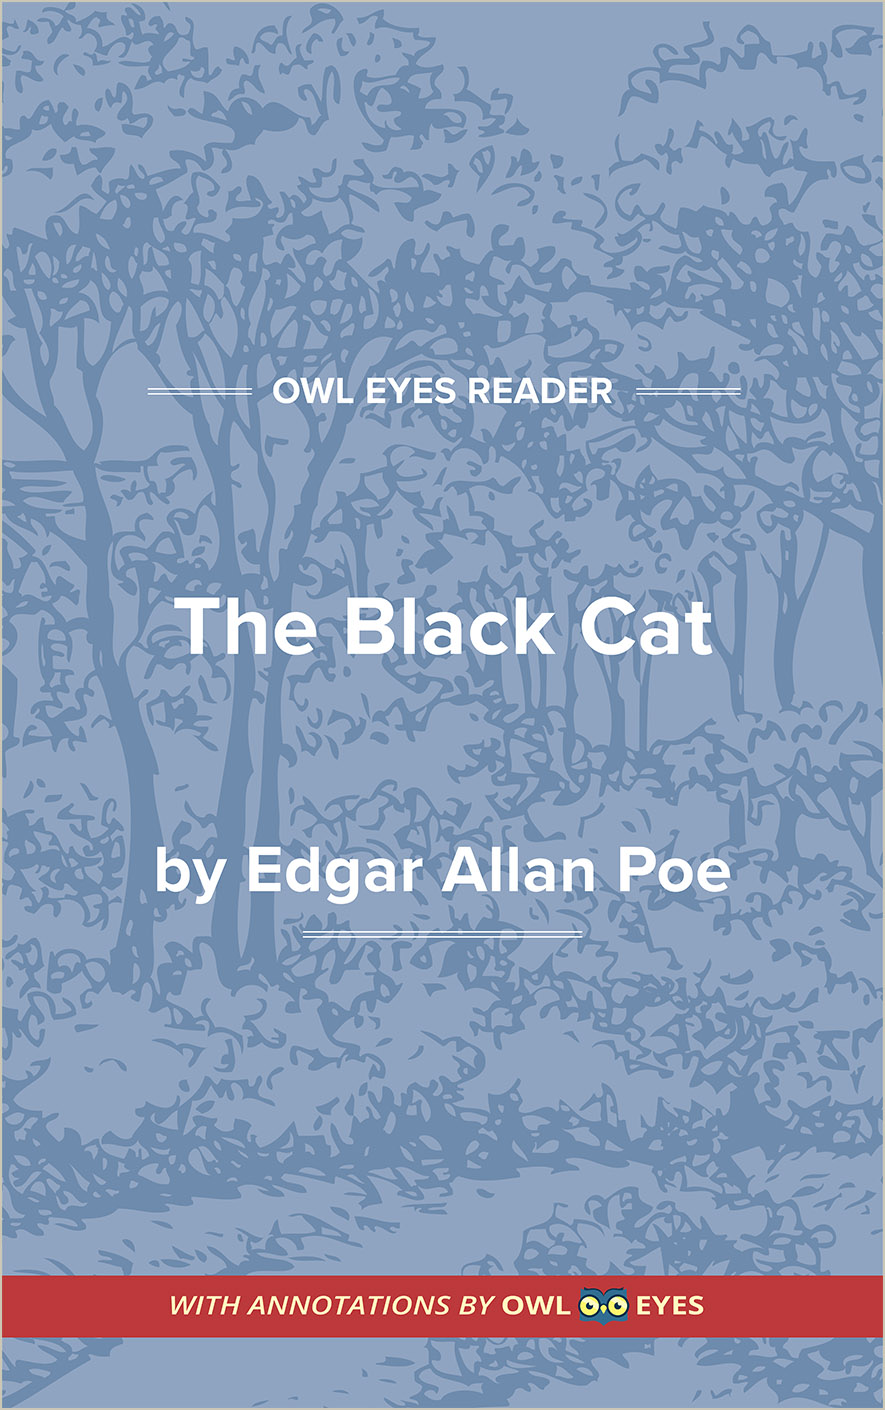 The Black Cat Cover Image